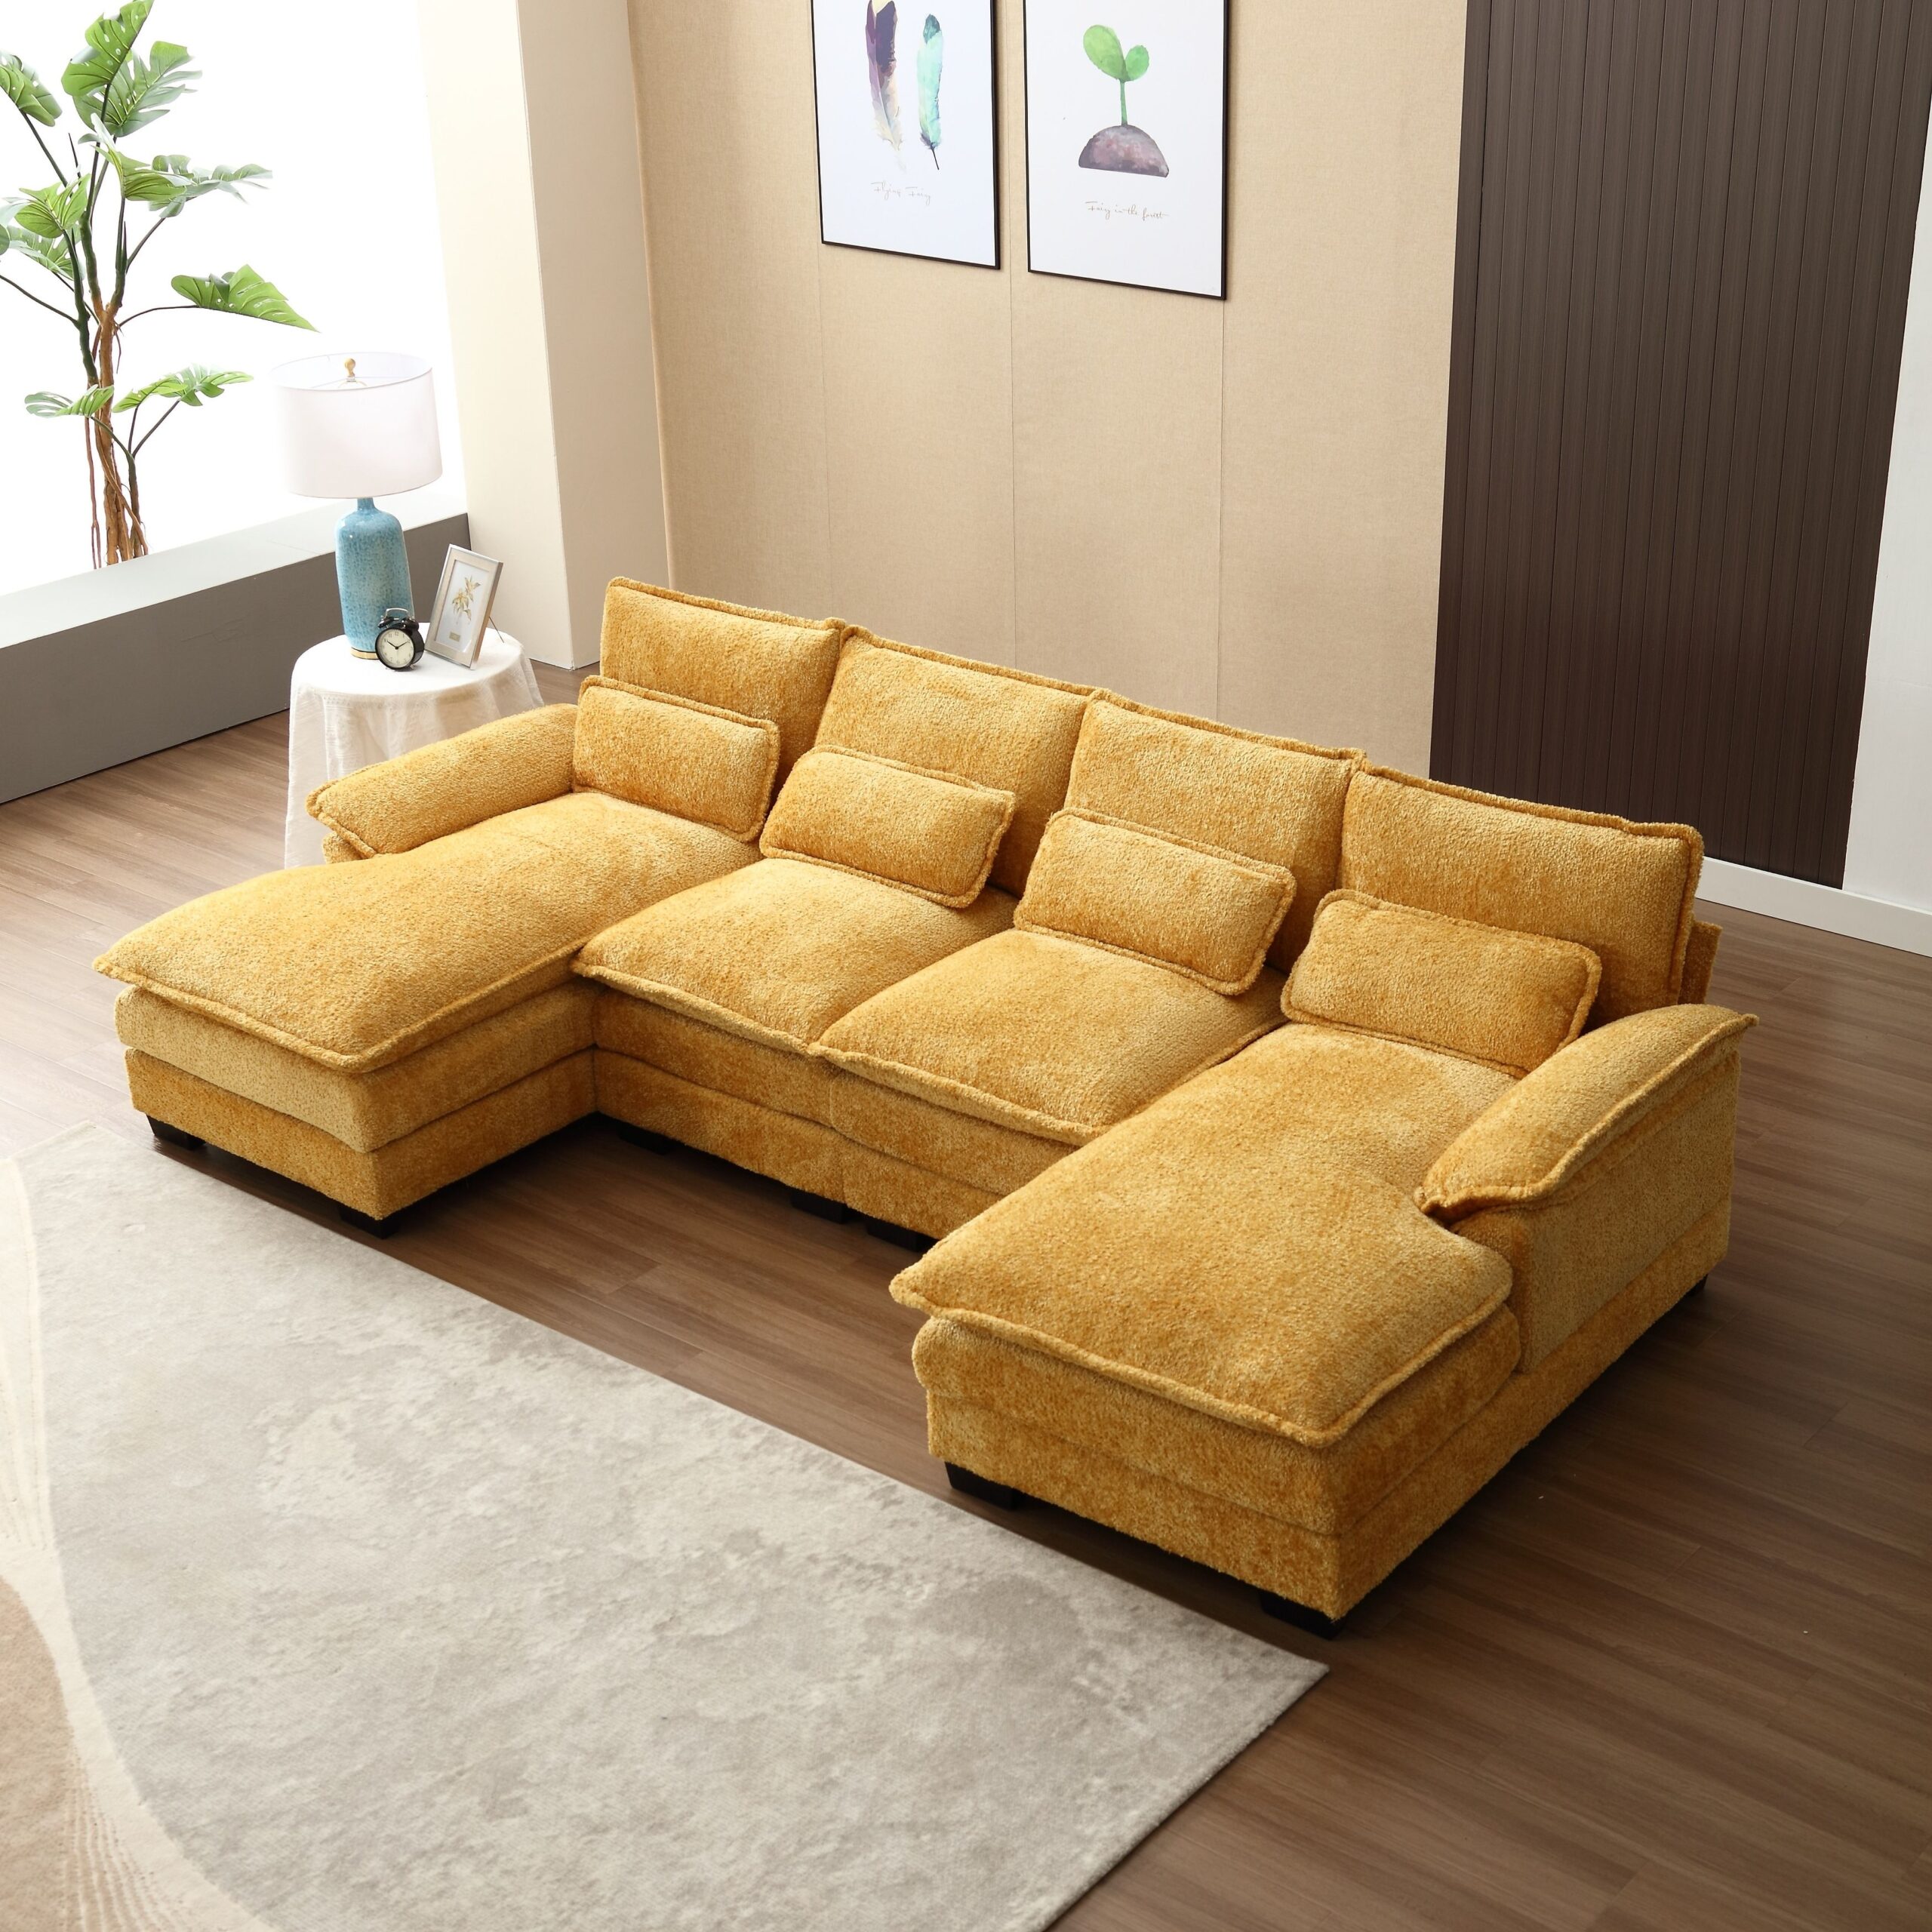 Ultimate Comfort: The Benefits of U Shaped Sectional Sofas for Your Living Room